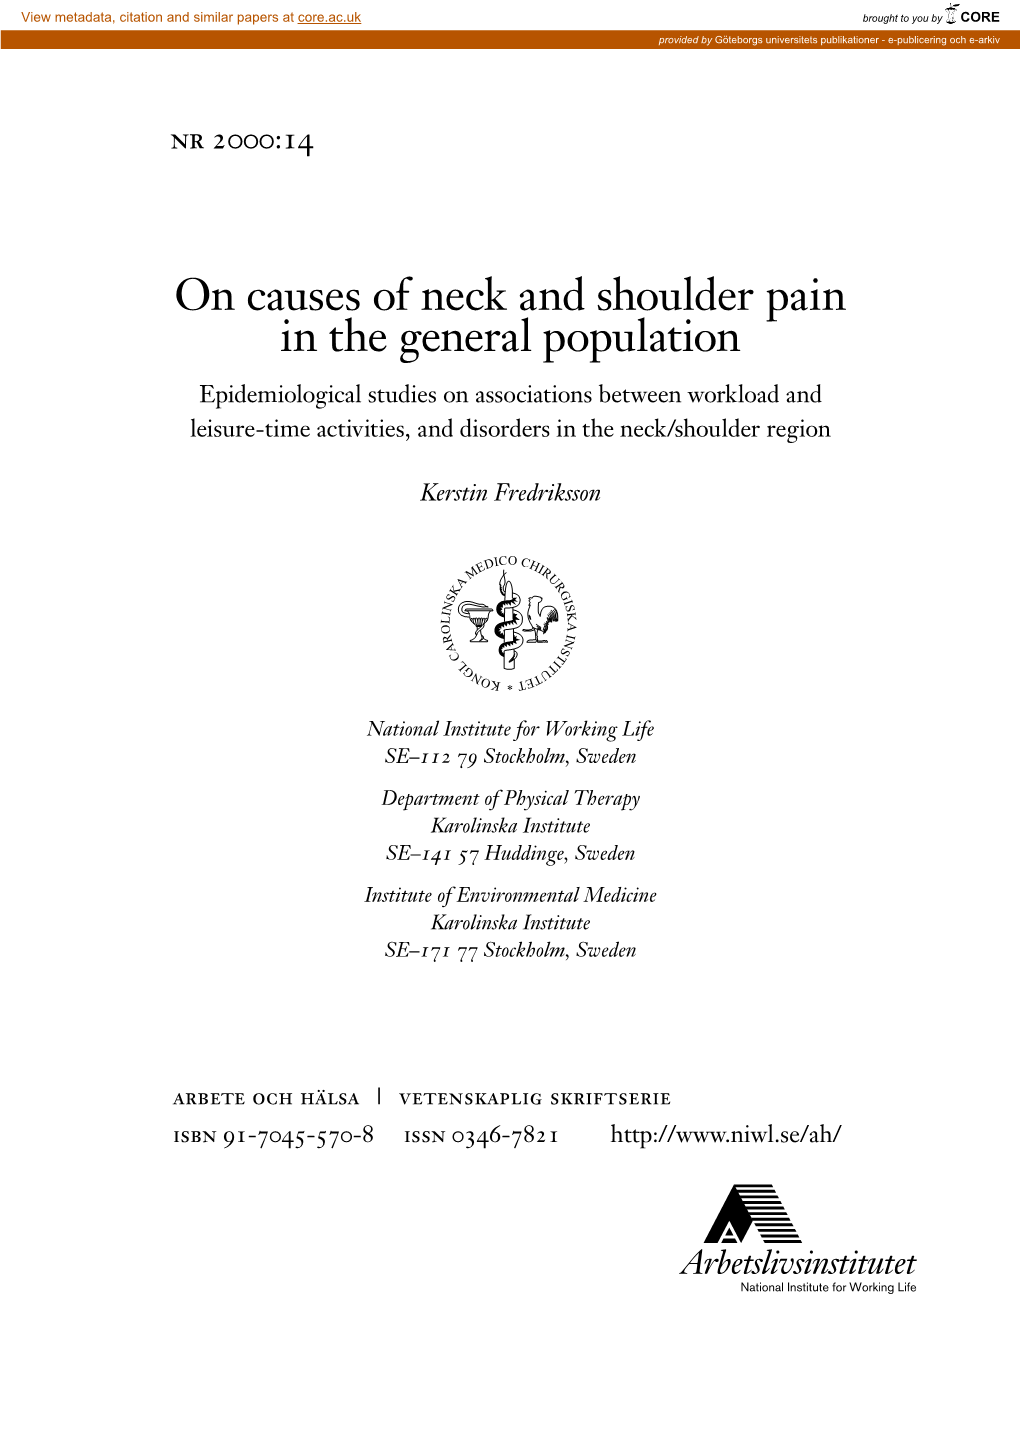 On Causes of Neck and Shoulder Pain in the General Population